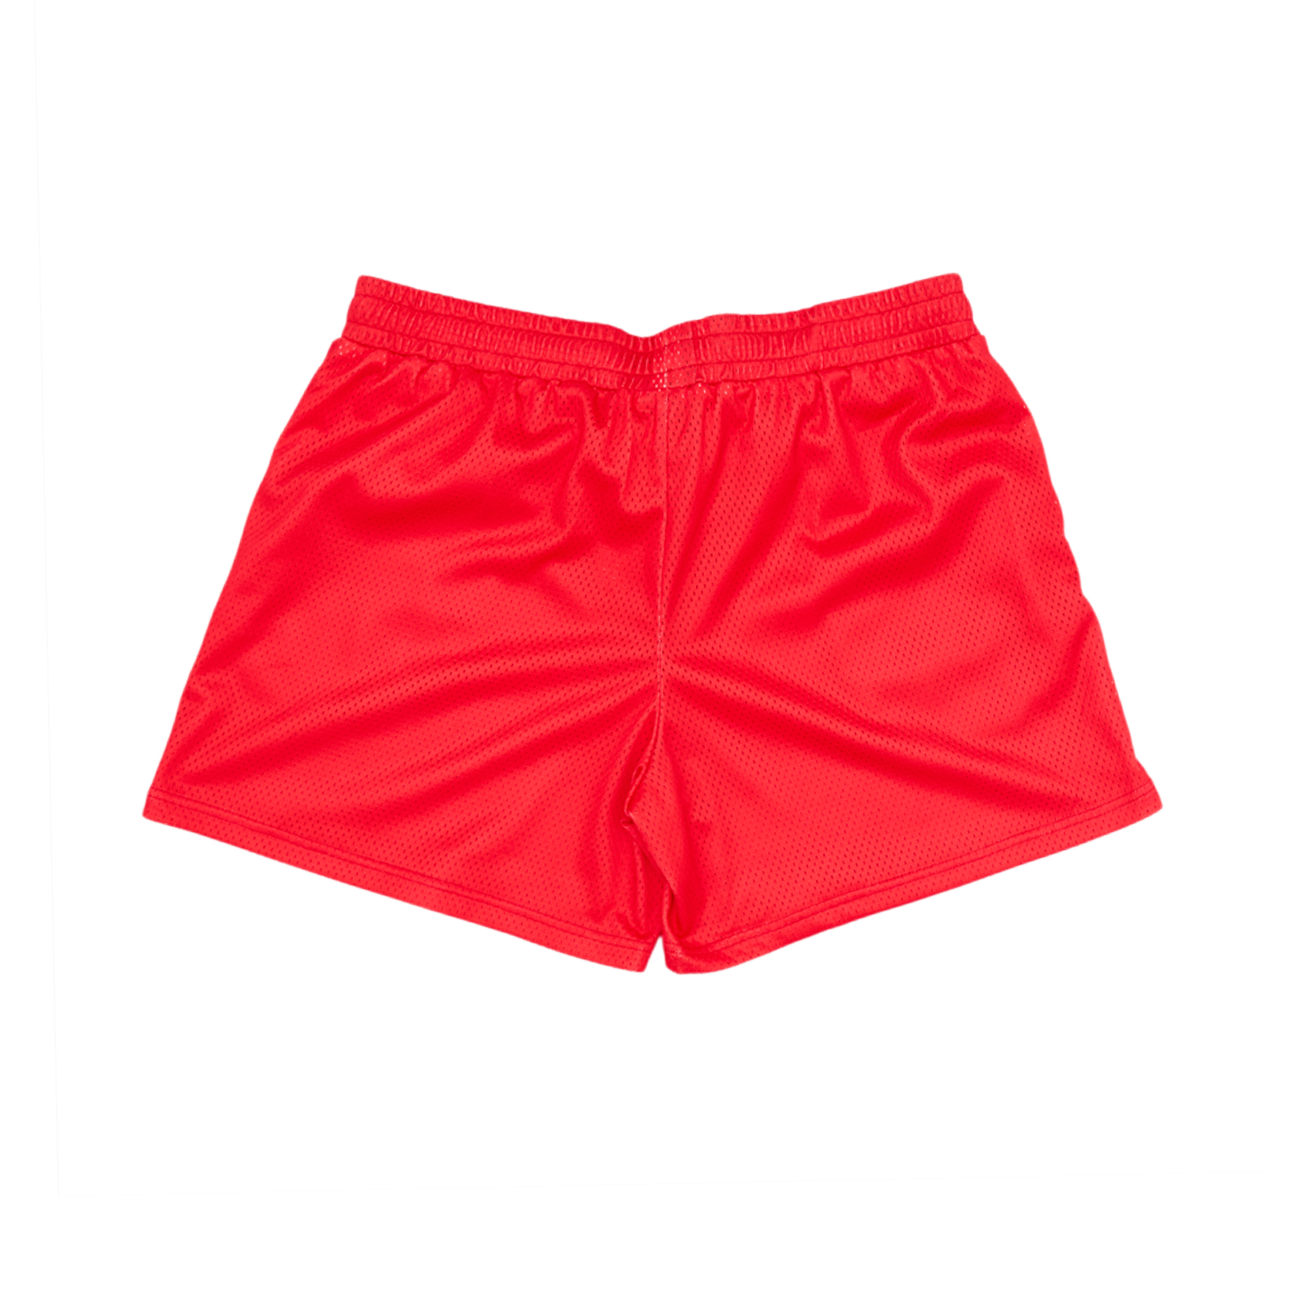 RL Red Butterfly Shorts Miami 22'